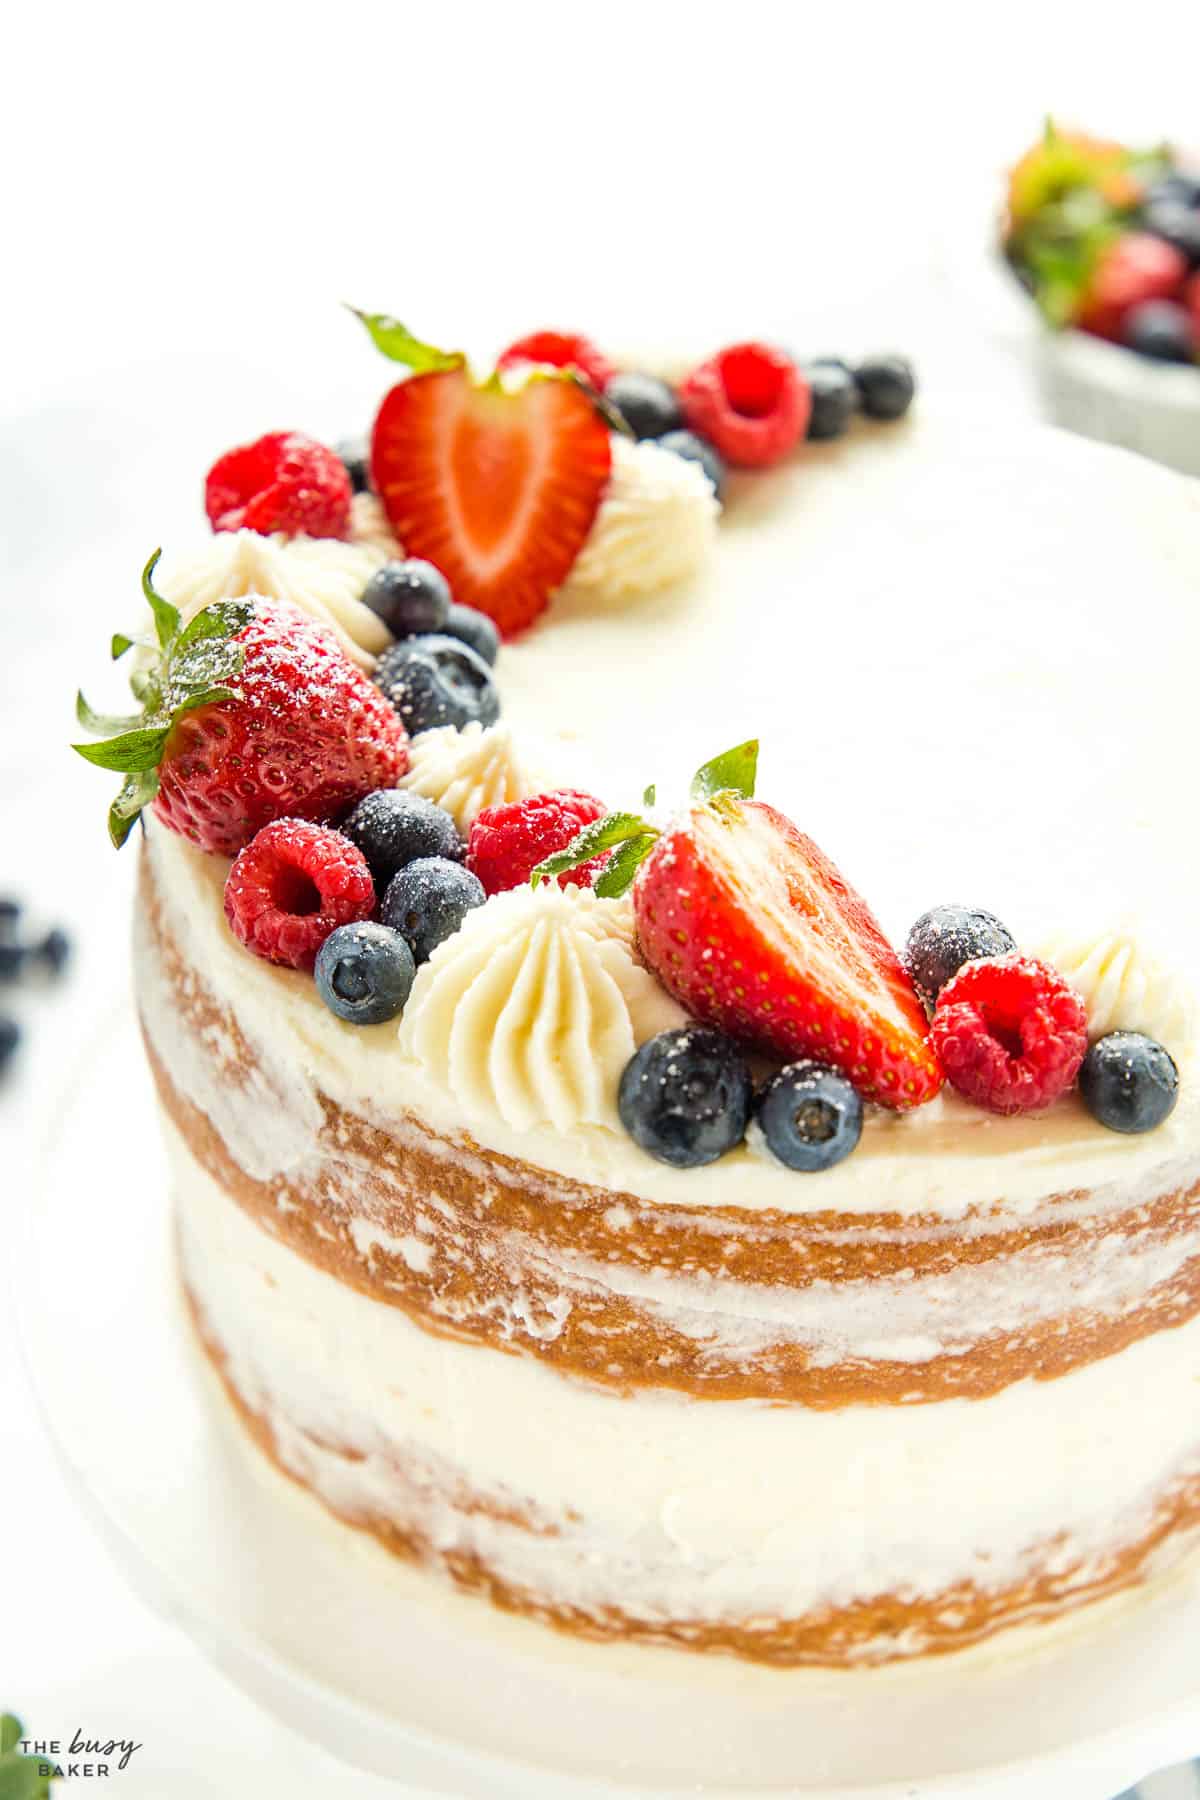 Rich & Smooth Icing - Vanilla Tropic - Cake Decorating Solutions